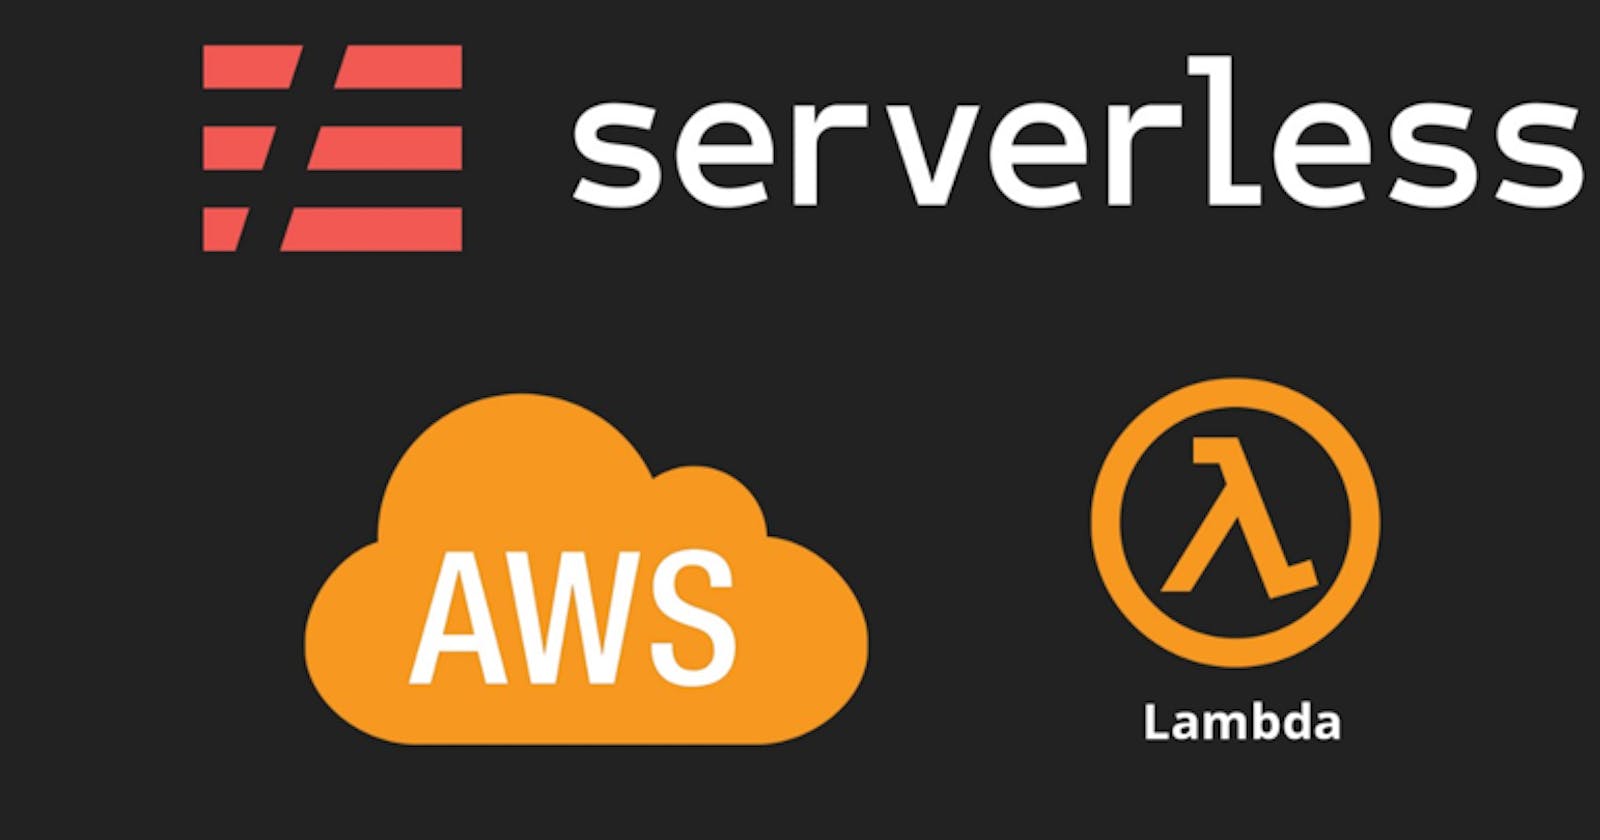 ServerlessArchitecture#04 AWS Lambda Cold Starts#PART-3 Just the First Request